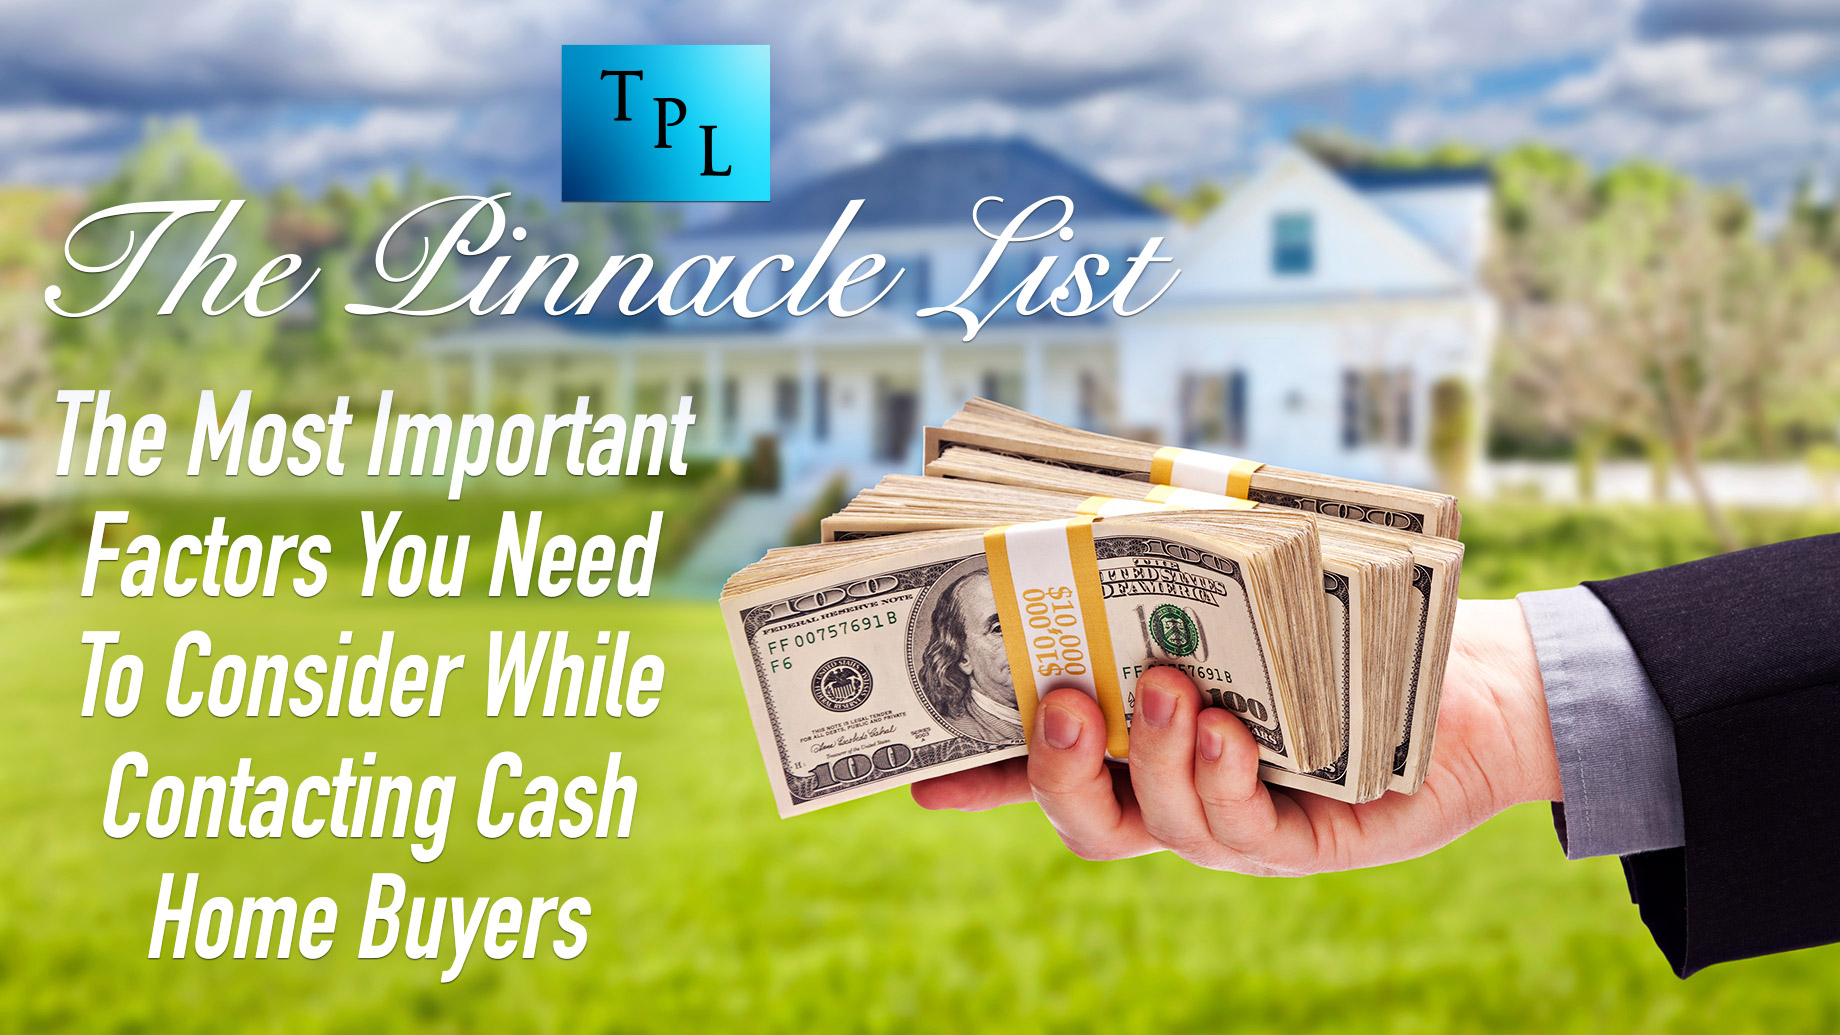 The Most Important Factors You Need To Consider While Contacting Cash Home Buyers